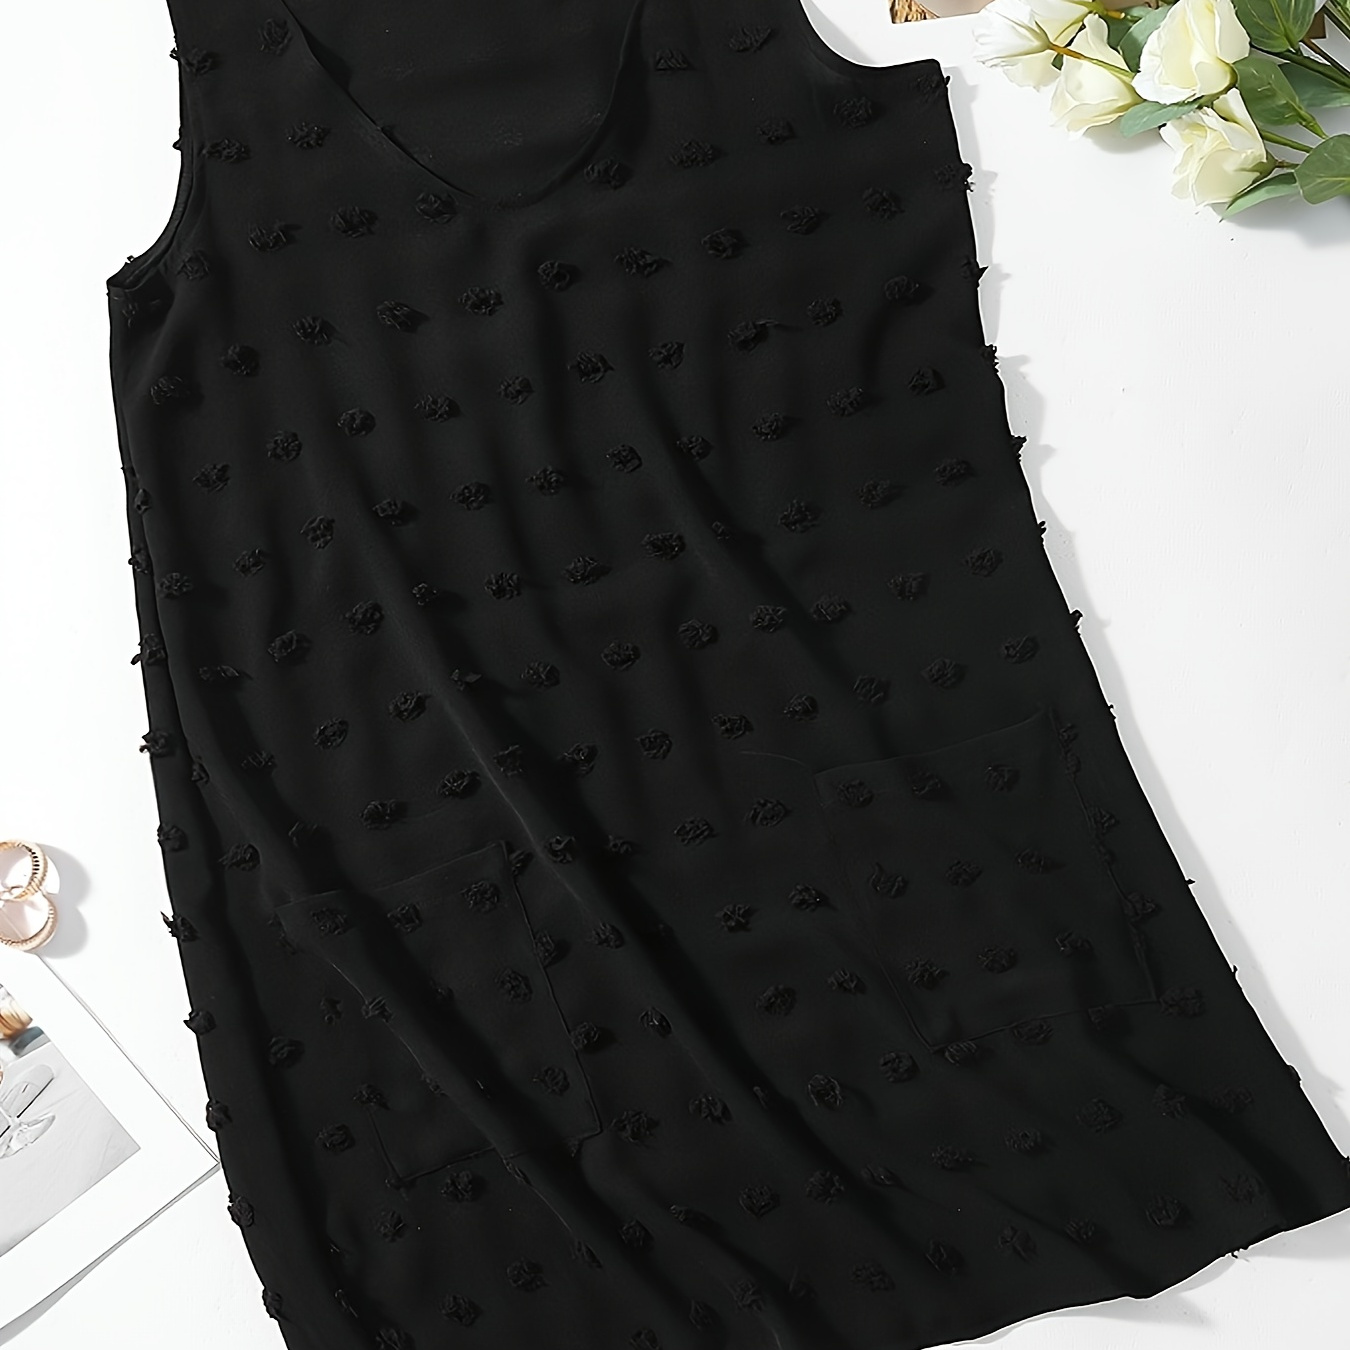 

Solid Black Jacquard Loose Cover Up Dress, Patch Pocket Scoop Neck Sleeveless Tank Dress, Women's Swimwear & Clothing For Holiday